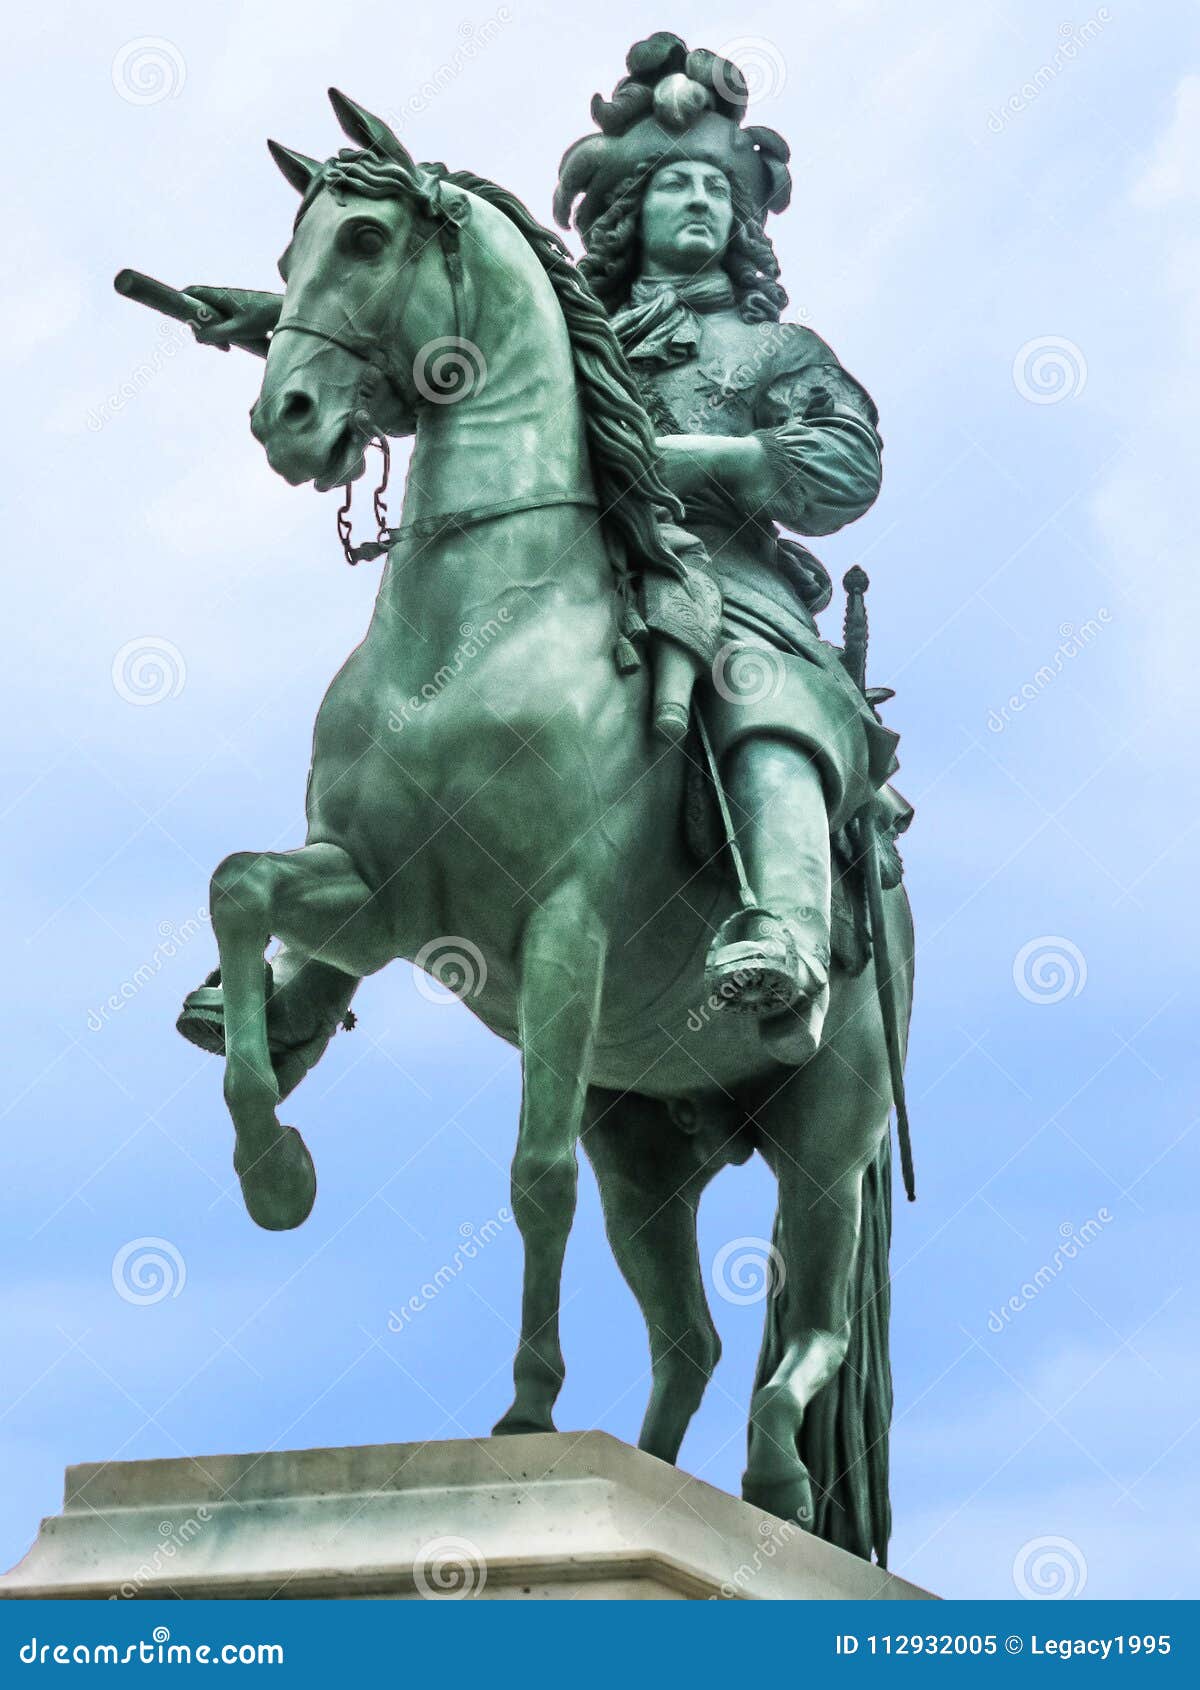 Palace Of Versailles - Louis XIV Statue Editorial Image - Image of france, louis: 112932005